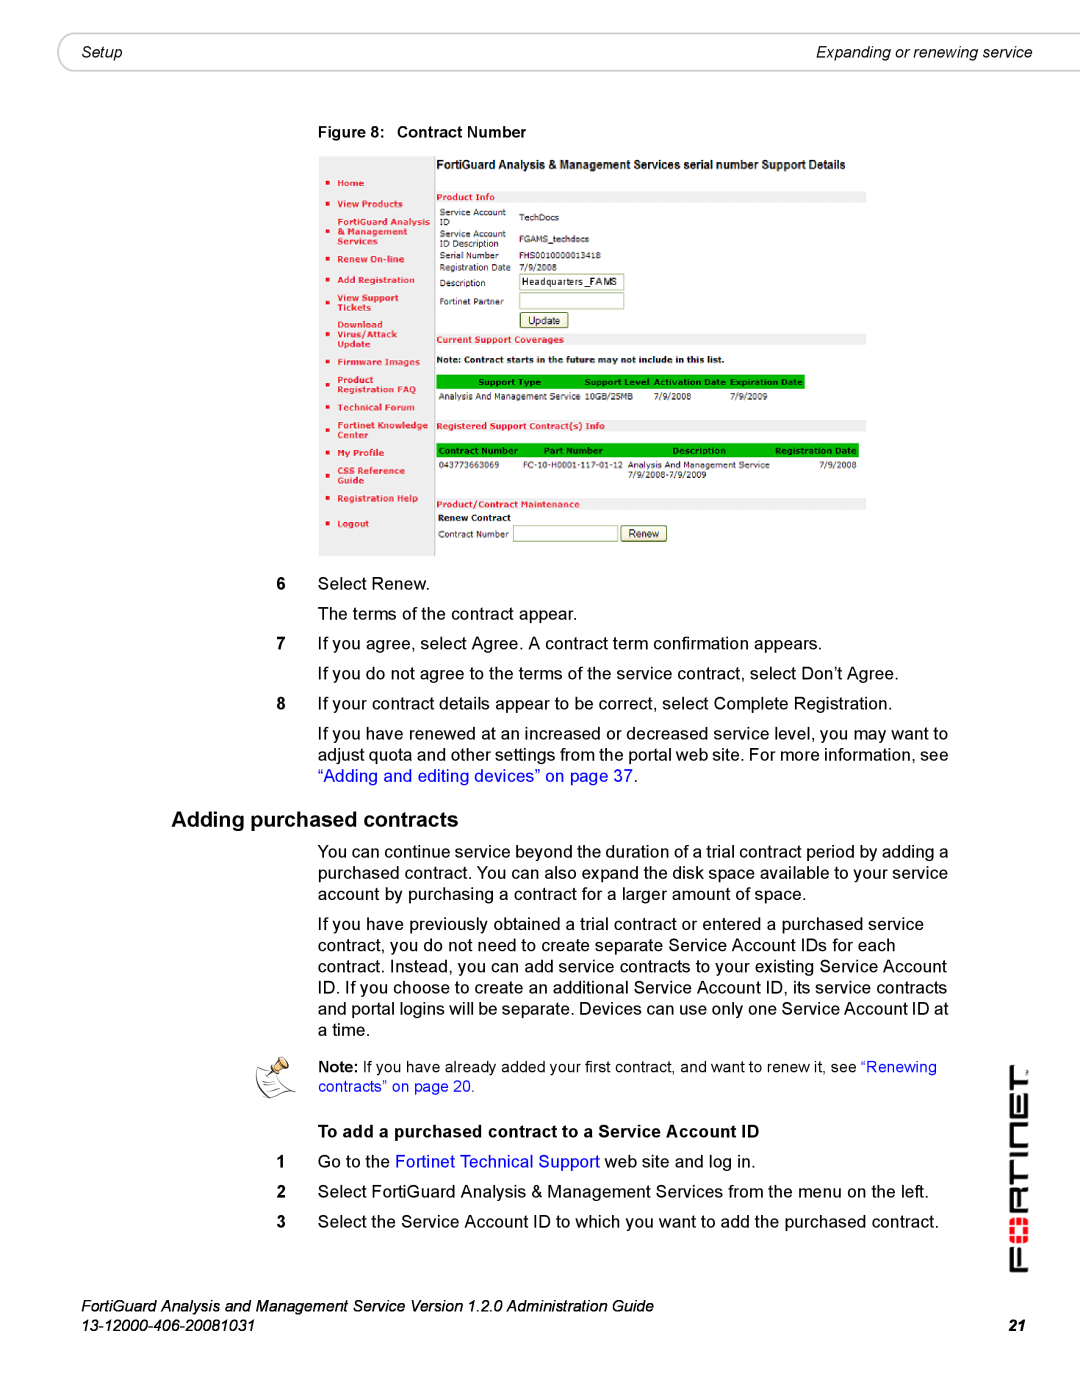 Fortinet 1.2.0 manual Adding purchased contracts, To add a purchased contract to a Service Account ID 